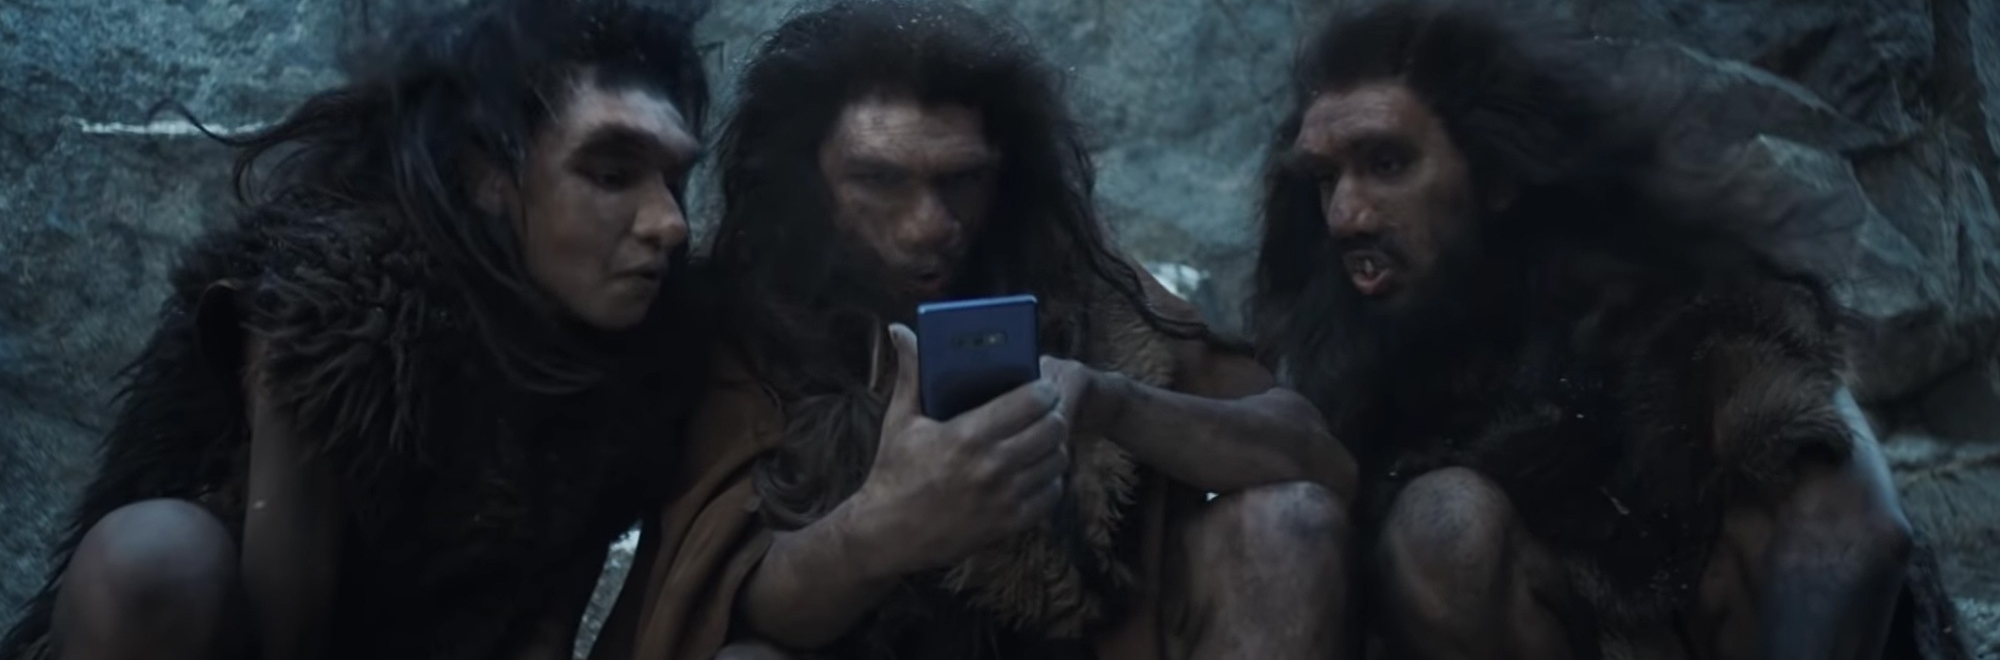 Is Three's "Phones are good" campaign funny, irresponsible or both?